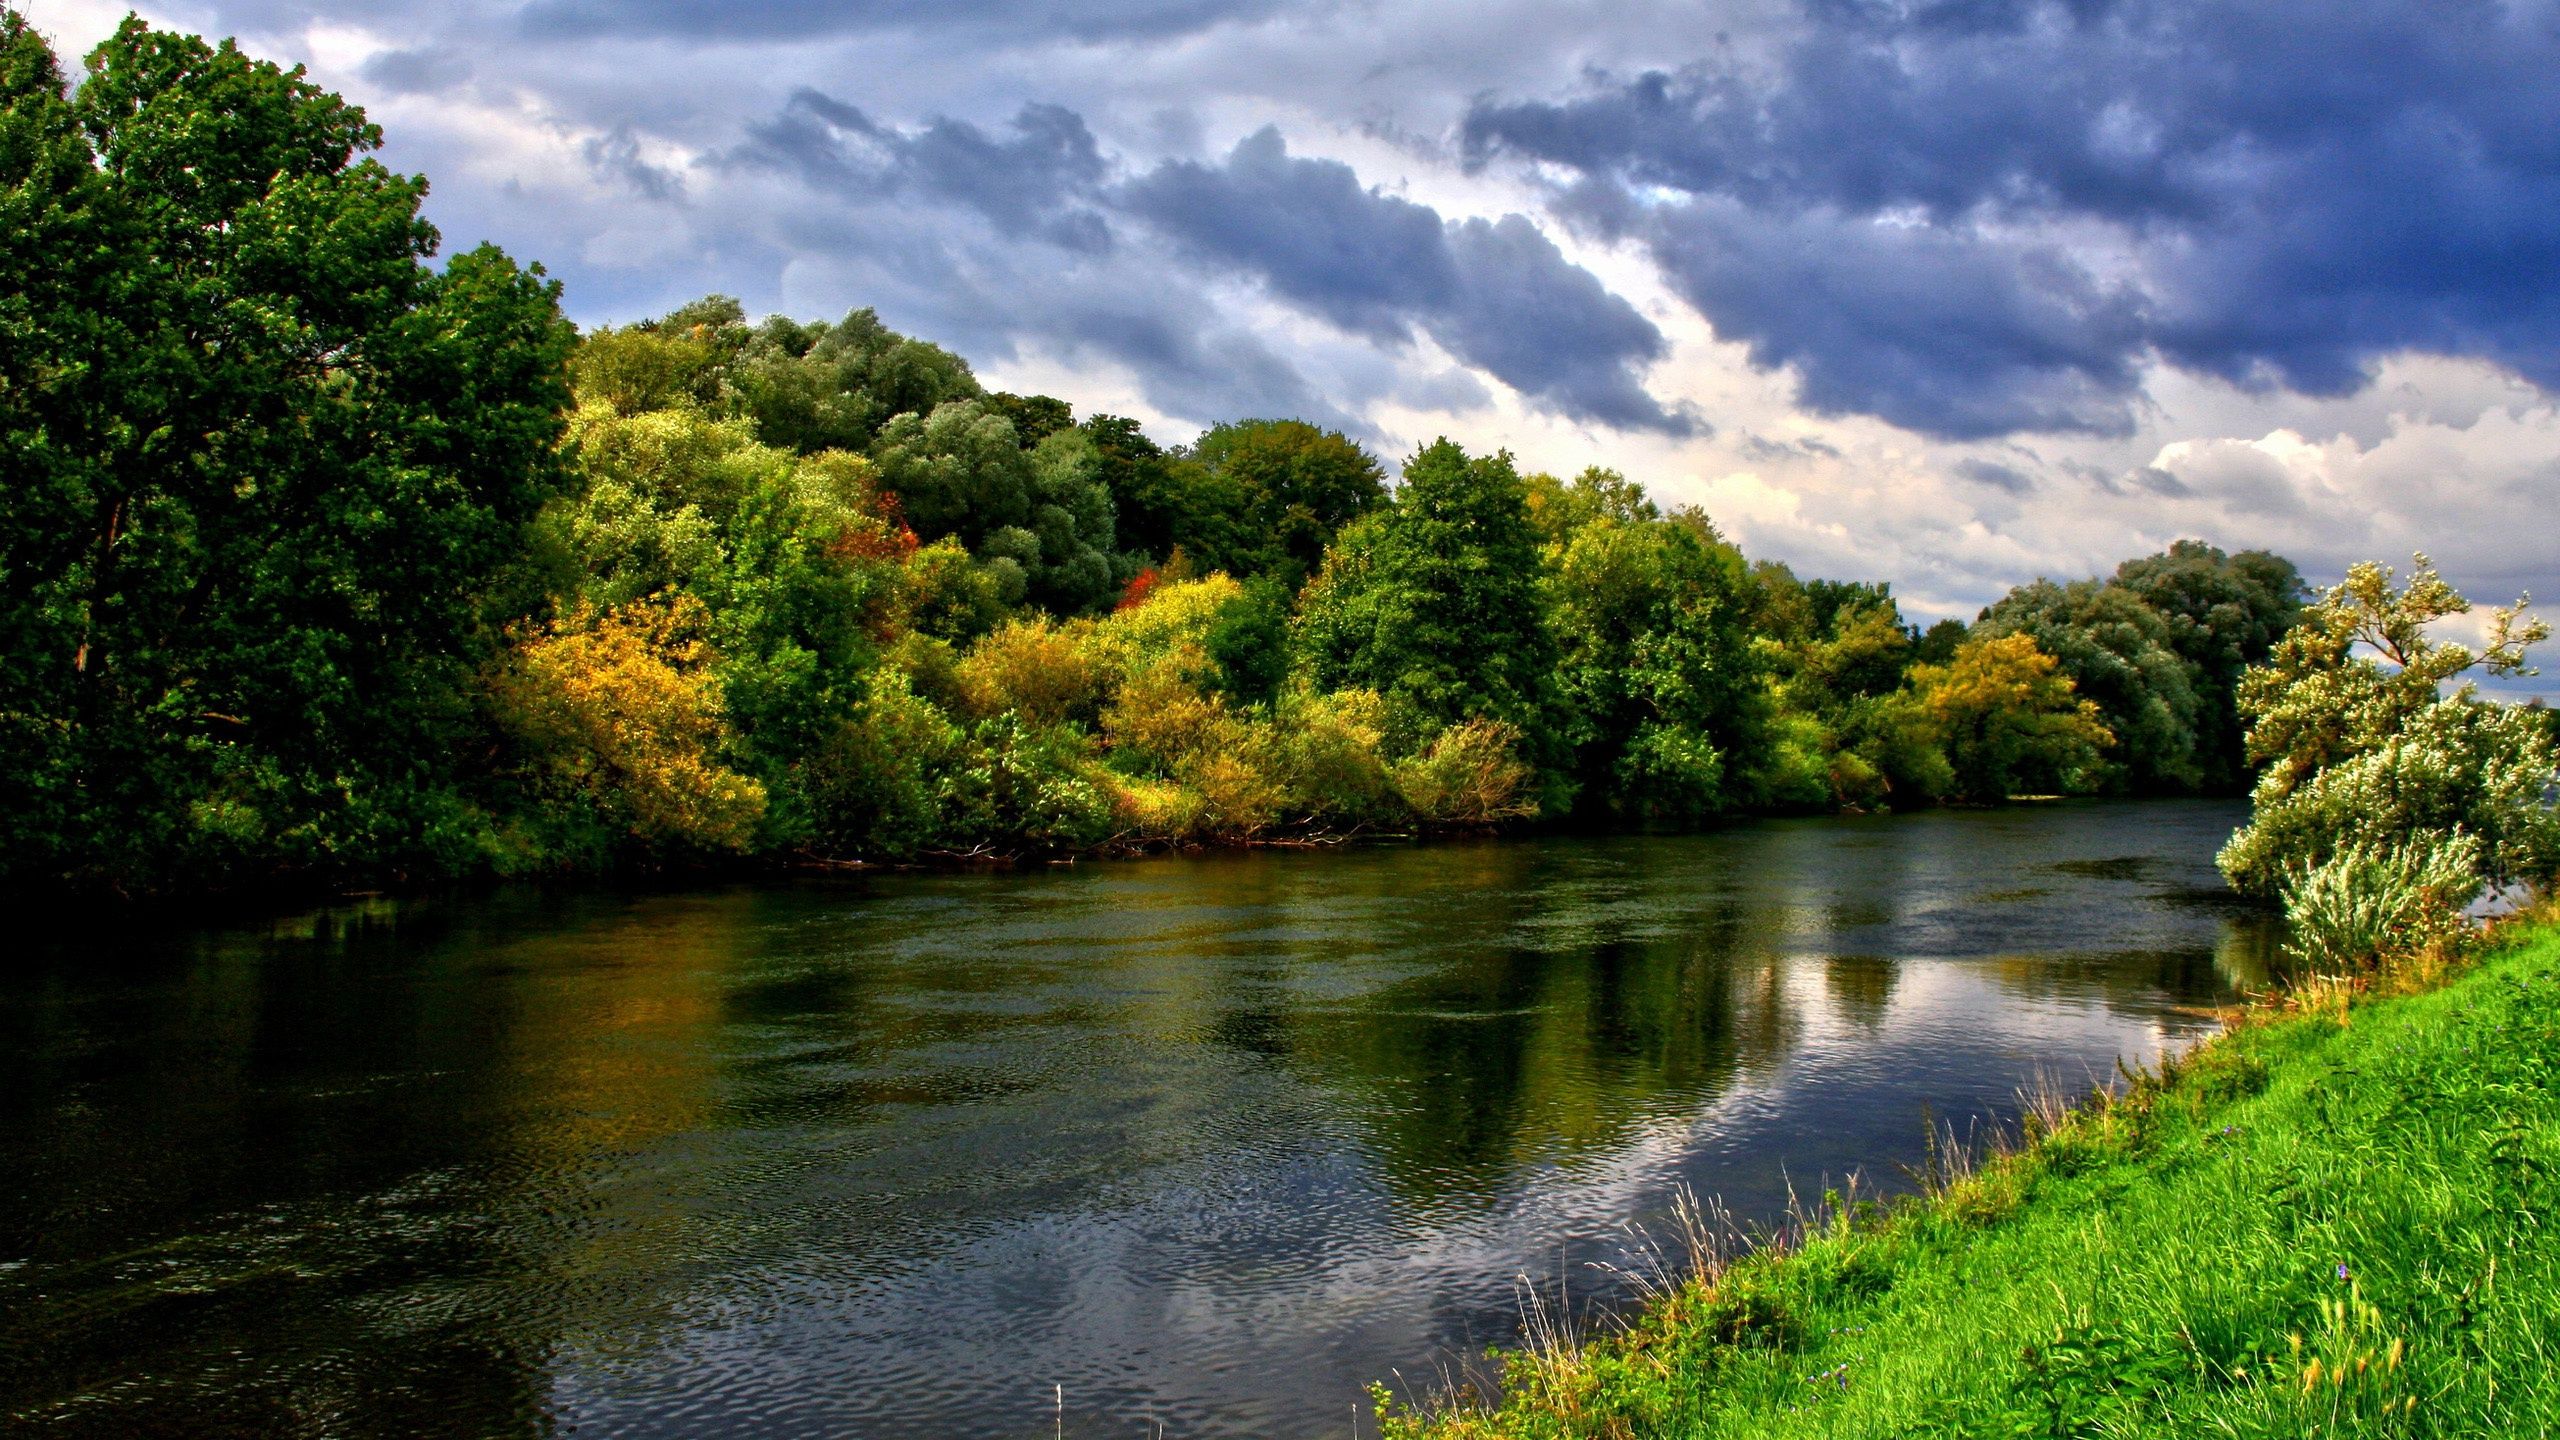 General 2560x1440 river forest nature water landscape trees sky clouds